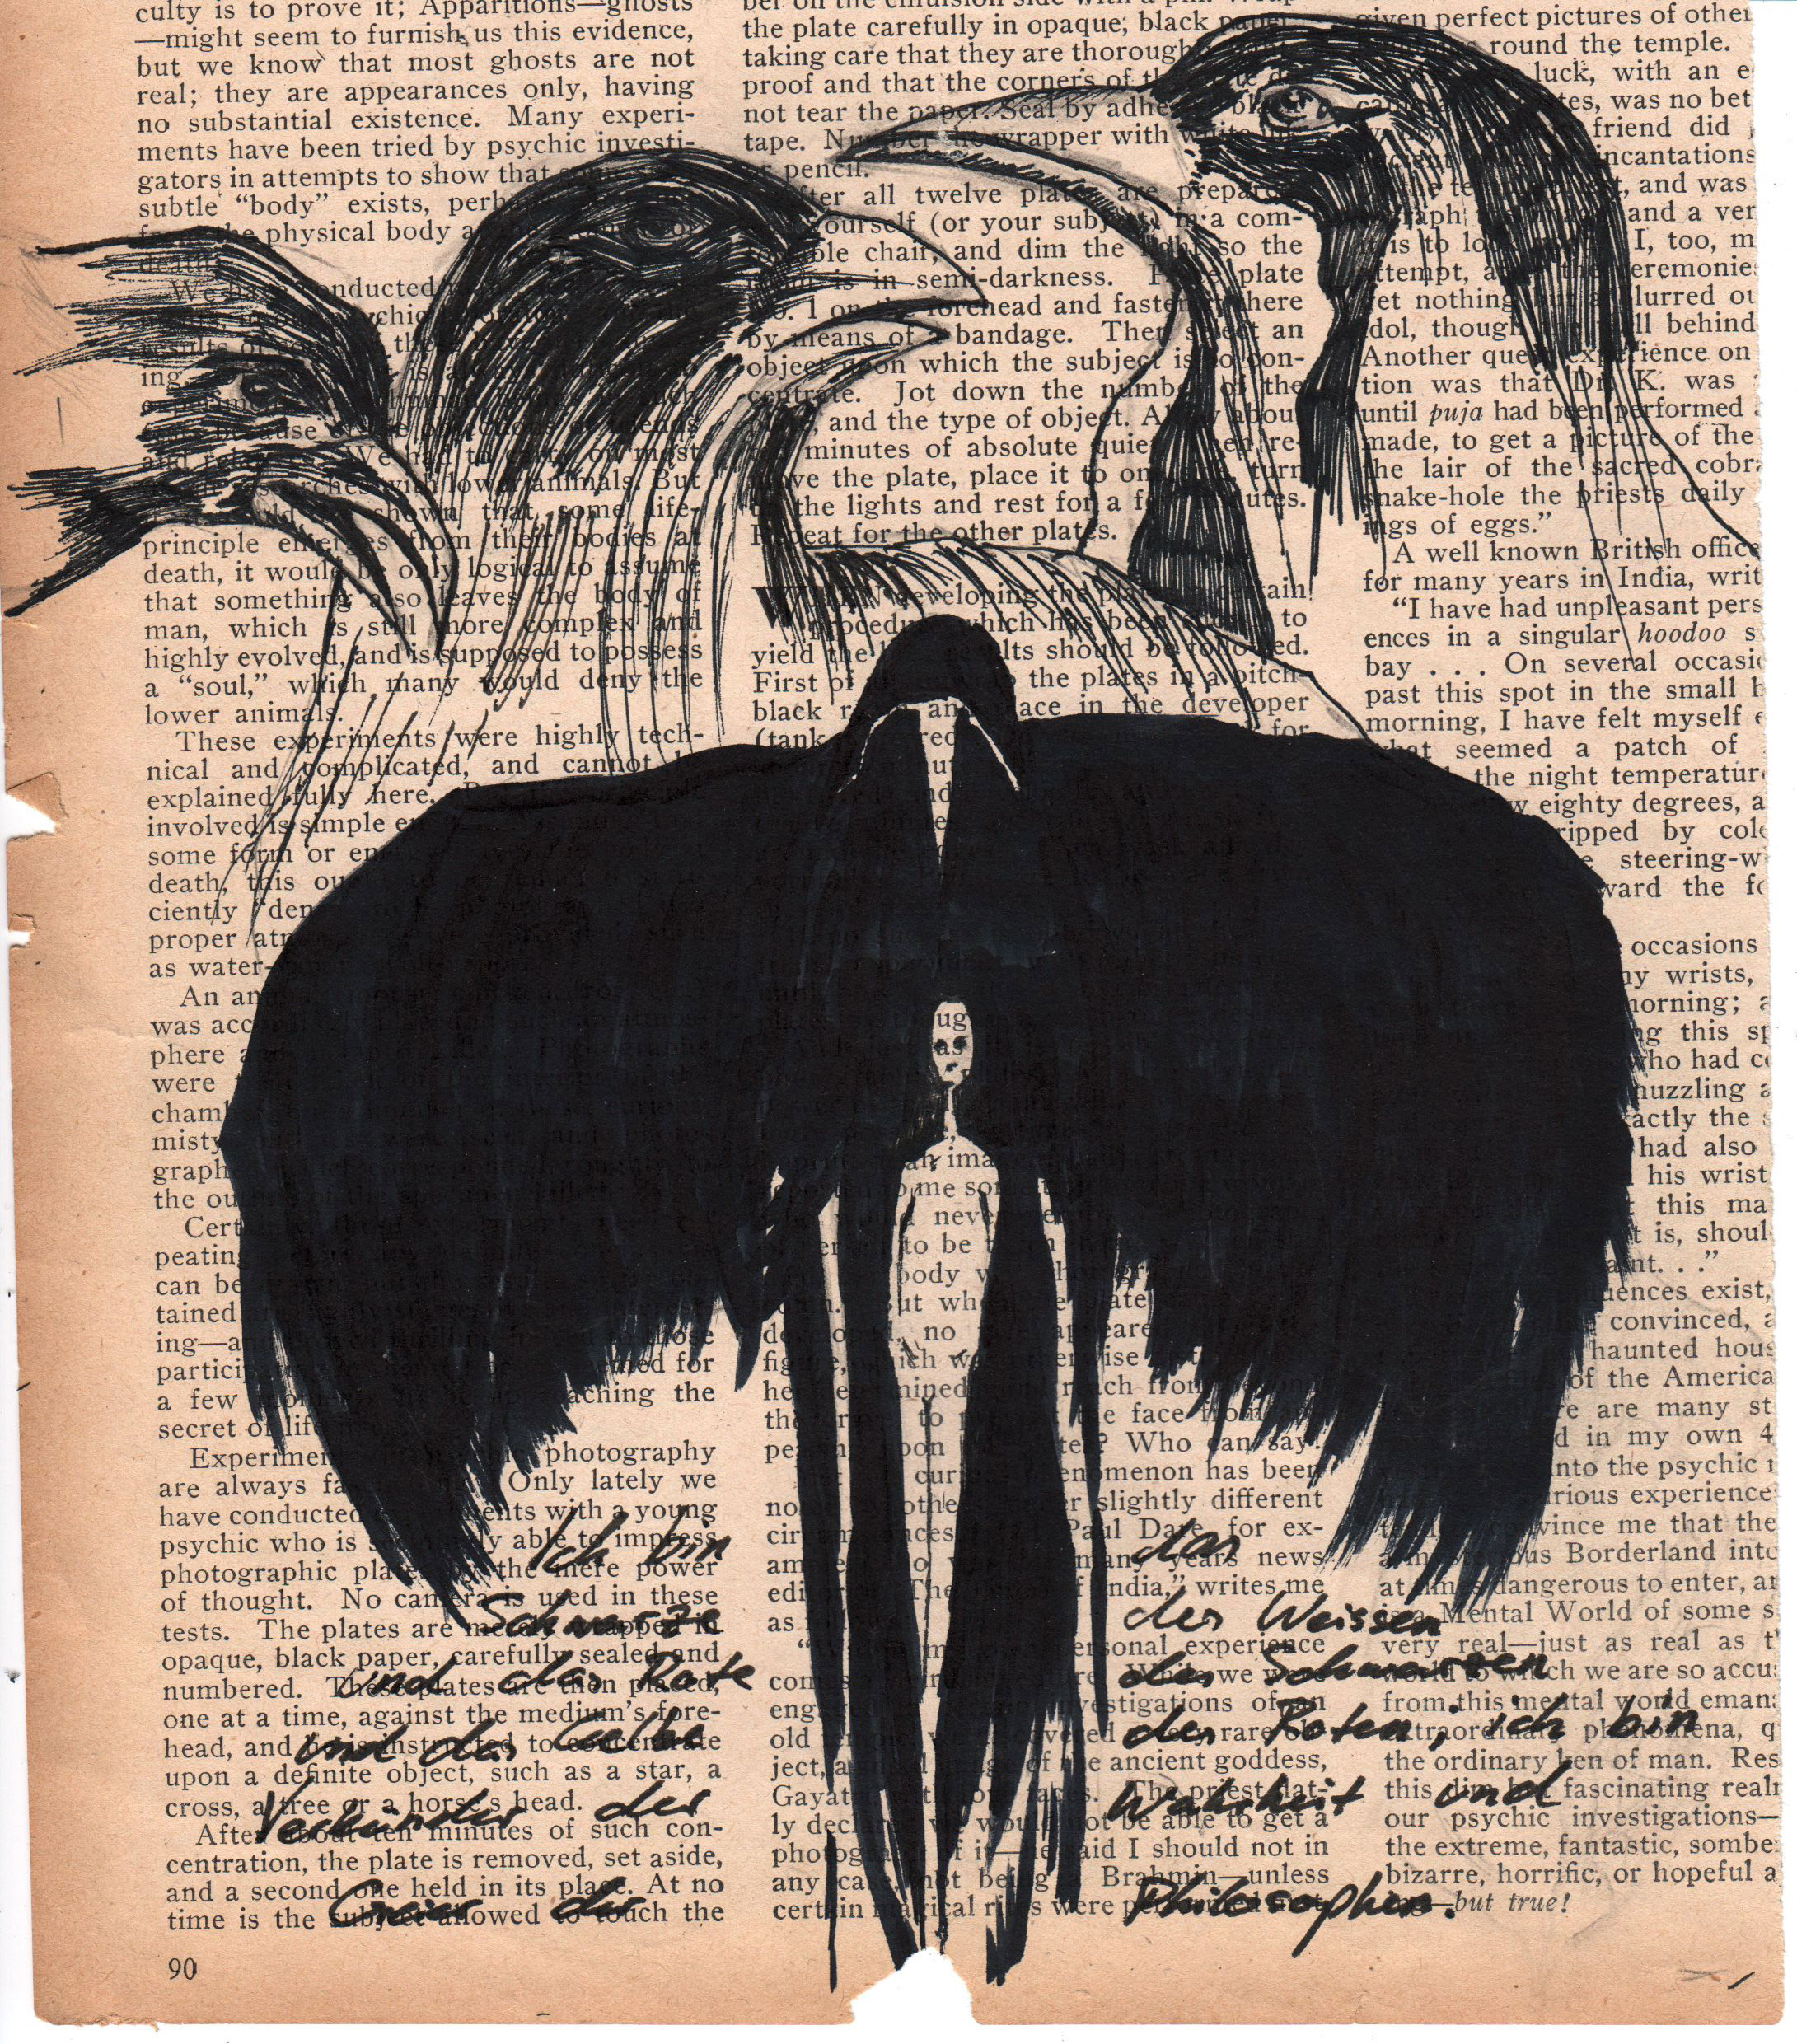 ink drawing on newspaper for the short film fragmente by tightrope films. mythical. bird person. by f-land